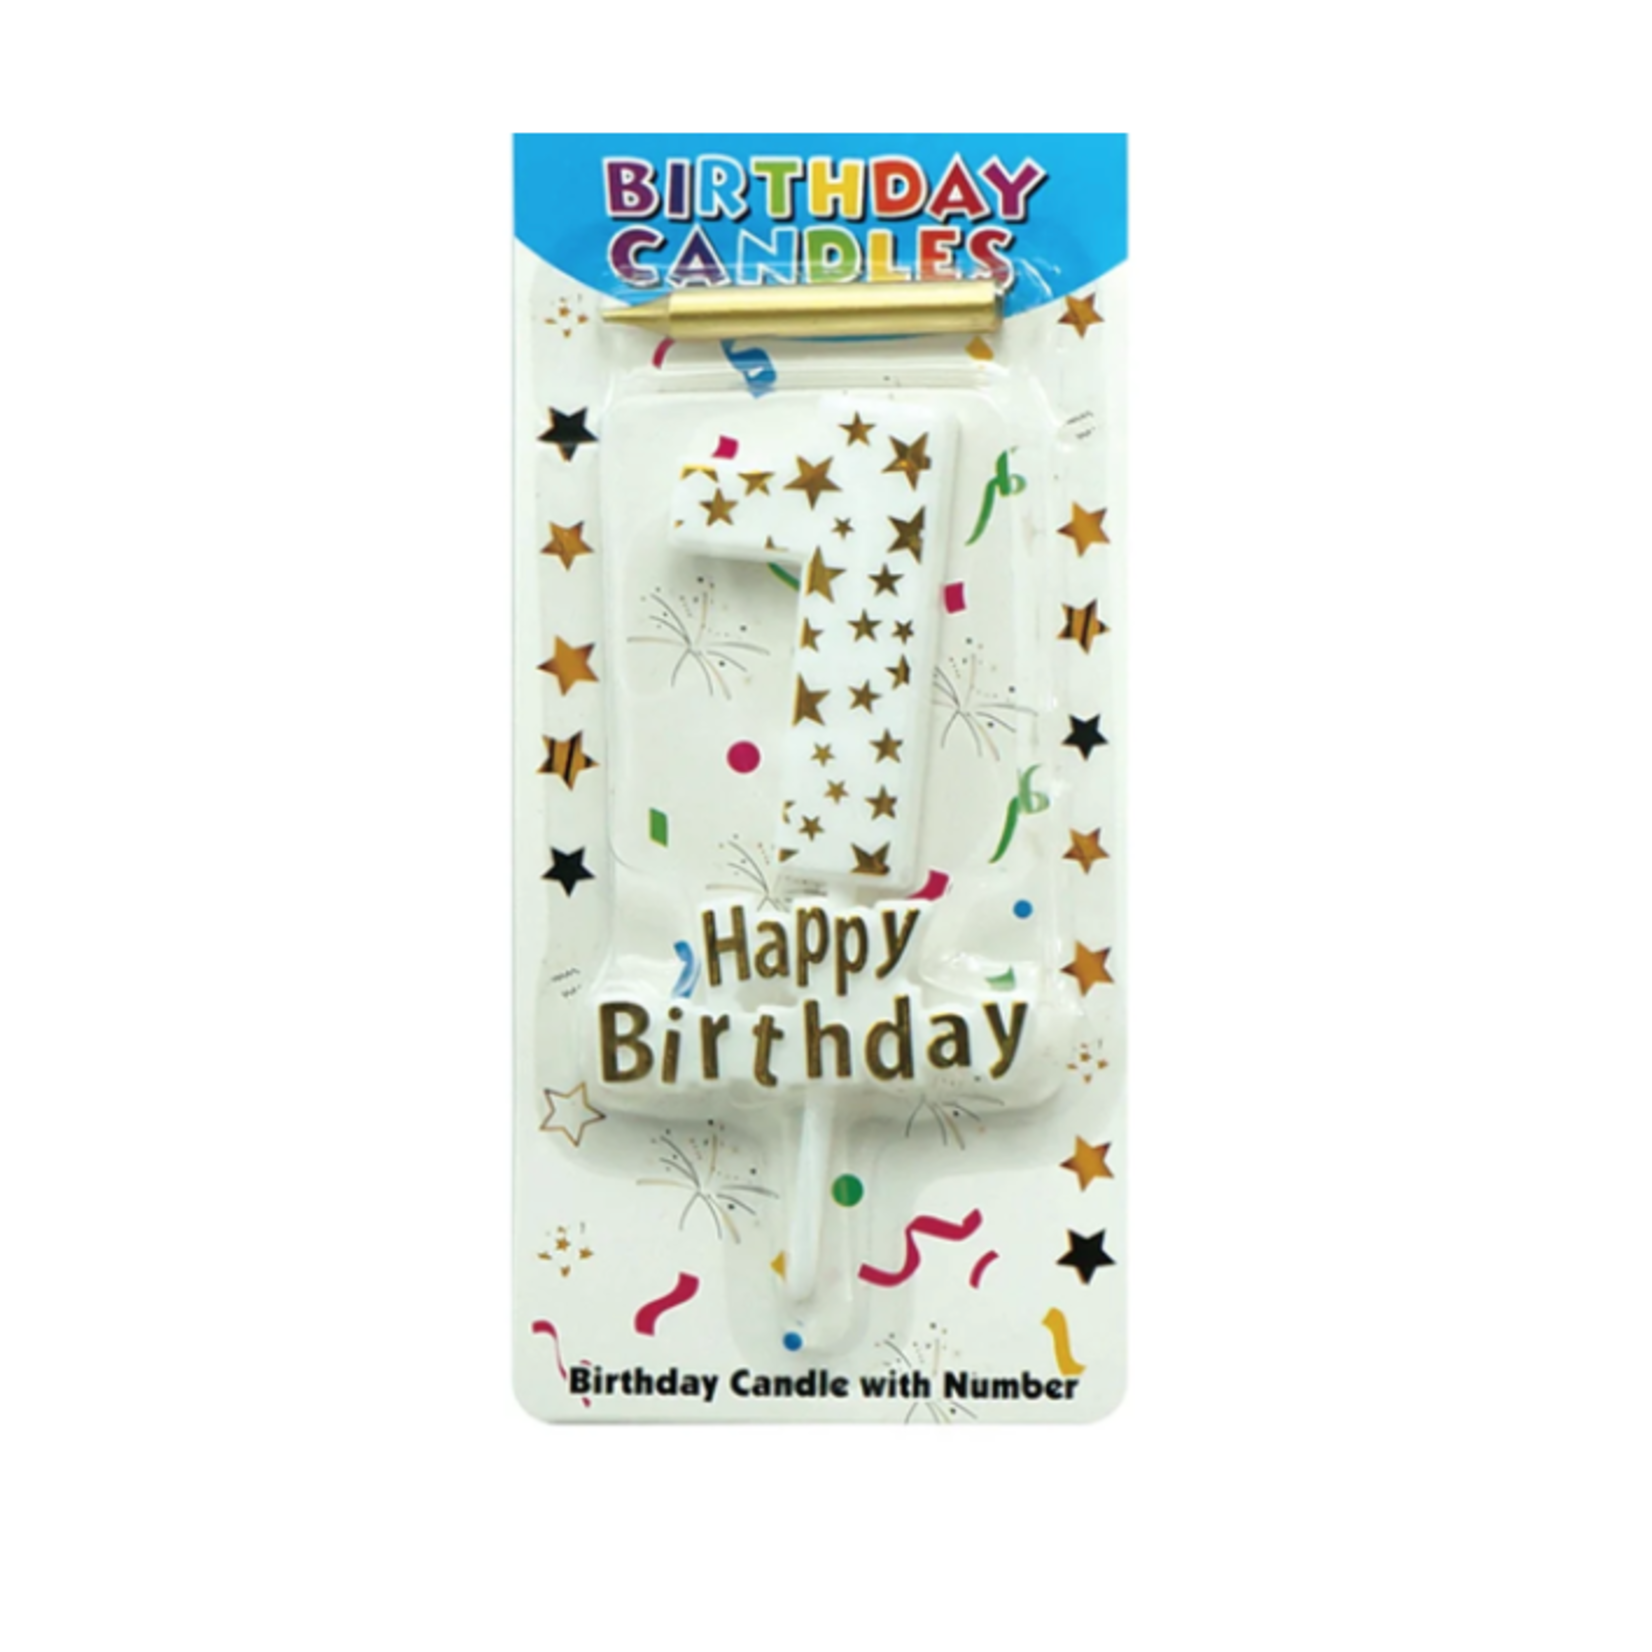 HAPPY BIRTHDAY CANDLE #1 WHITE WITH GOLD STARS